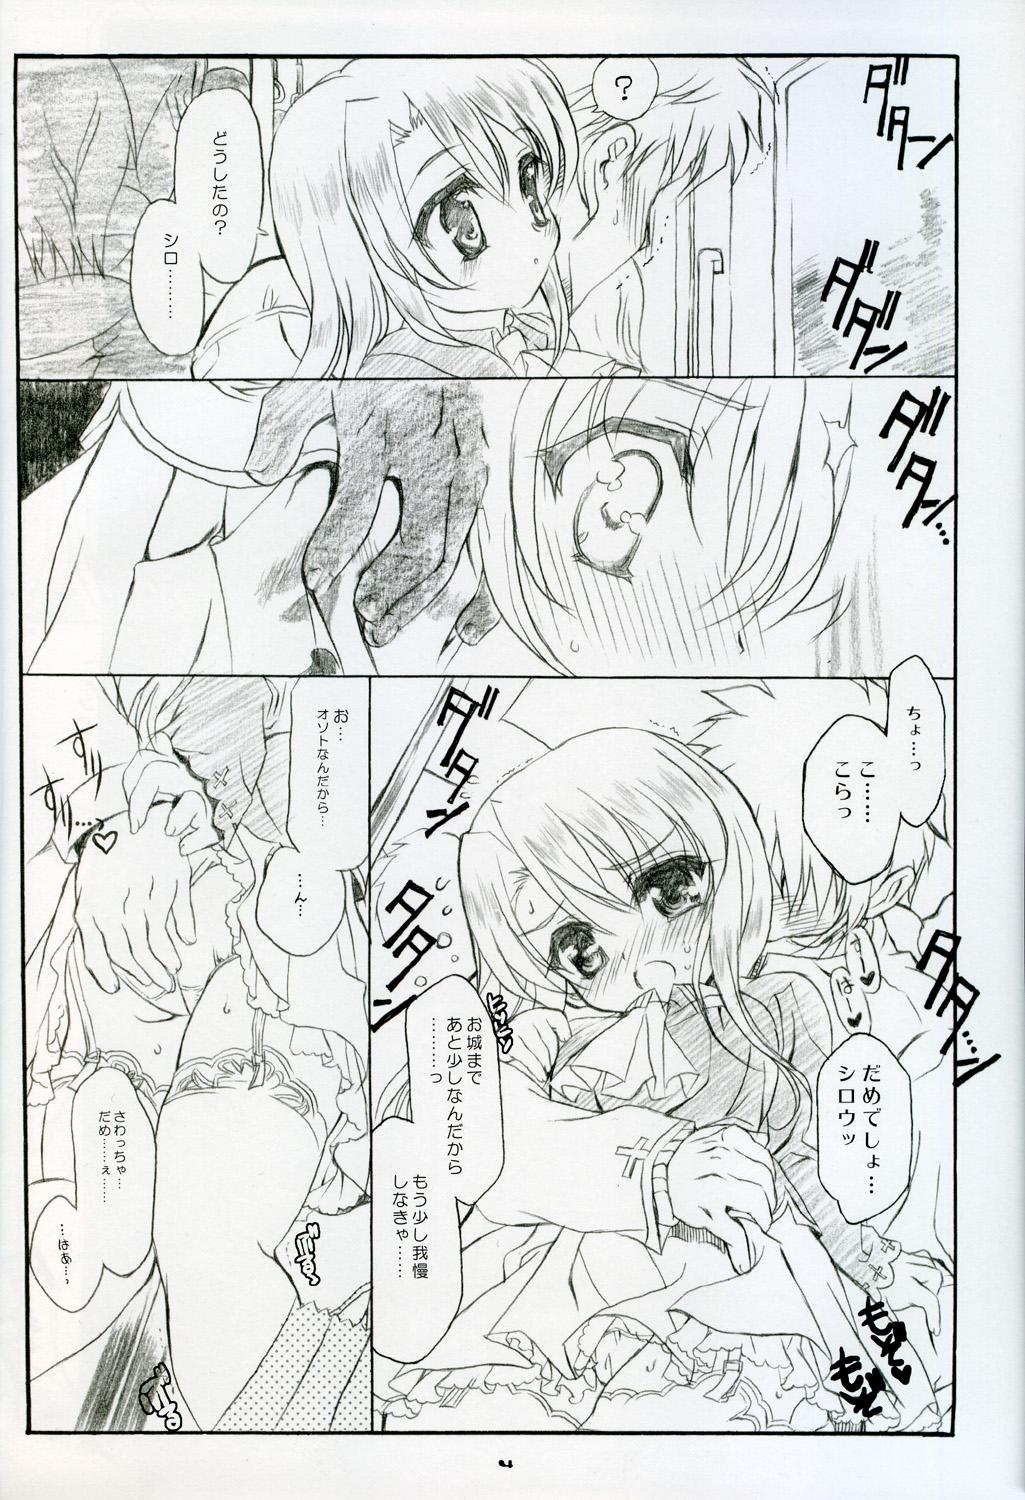 First Time Illya Train Shopping - Fate stay night Gilf - Page 4